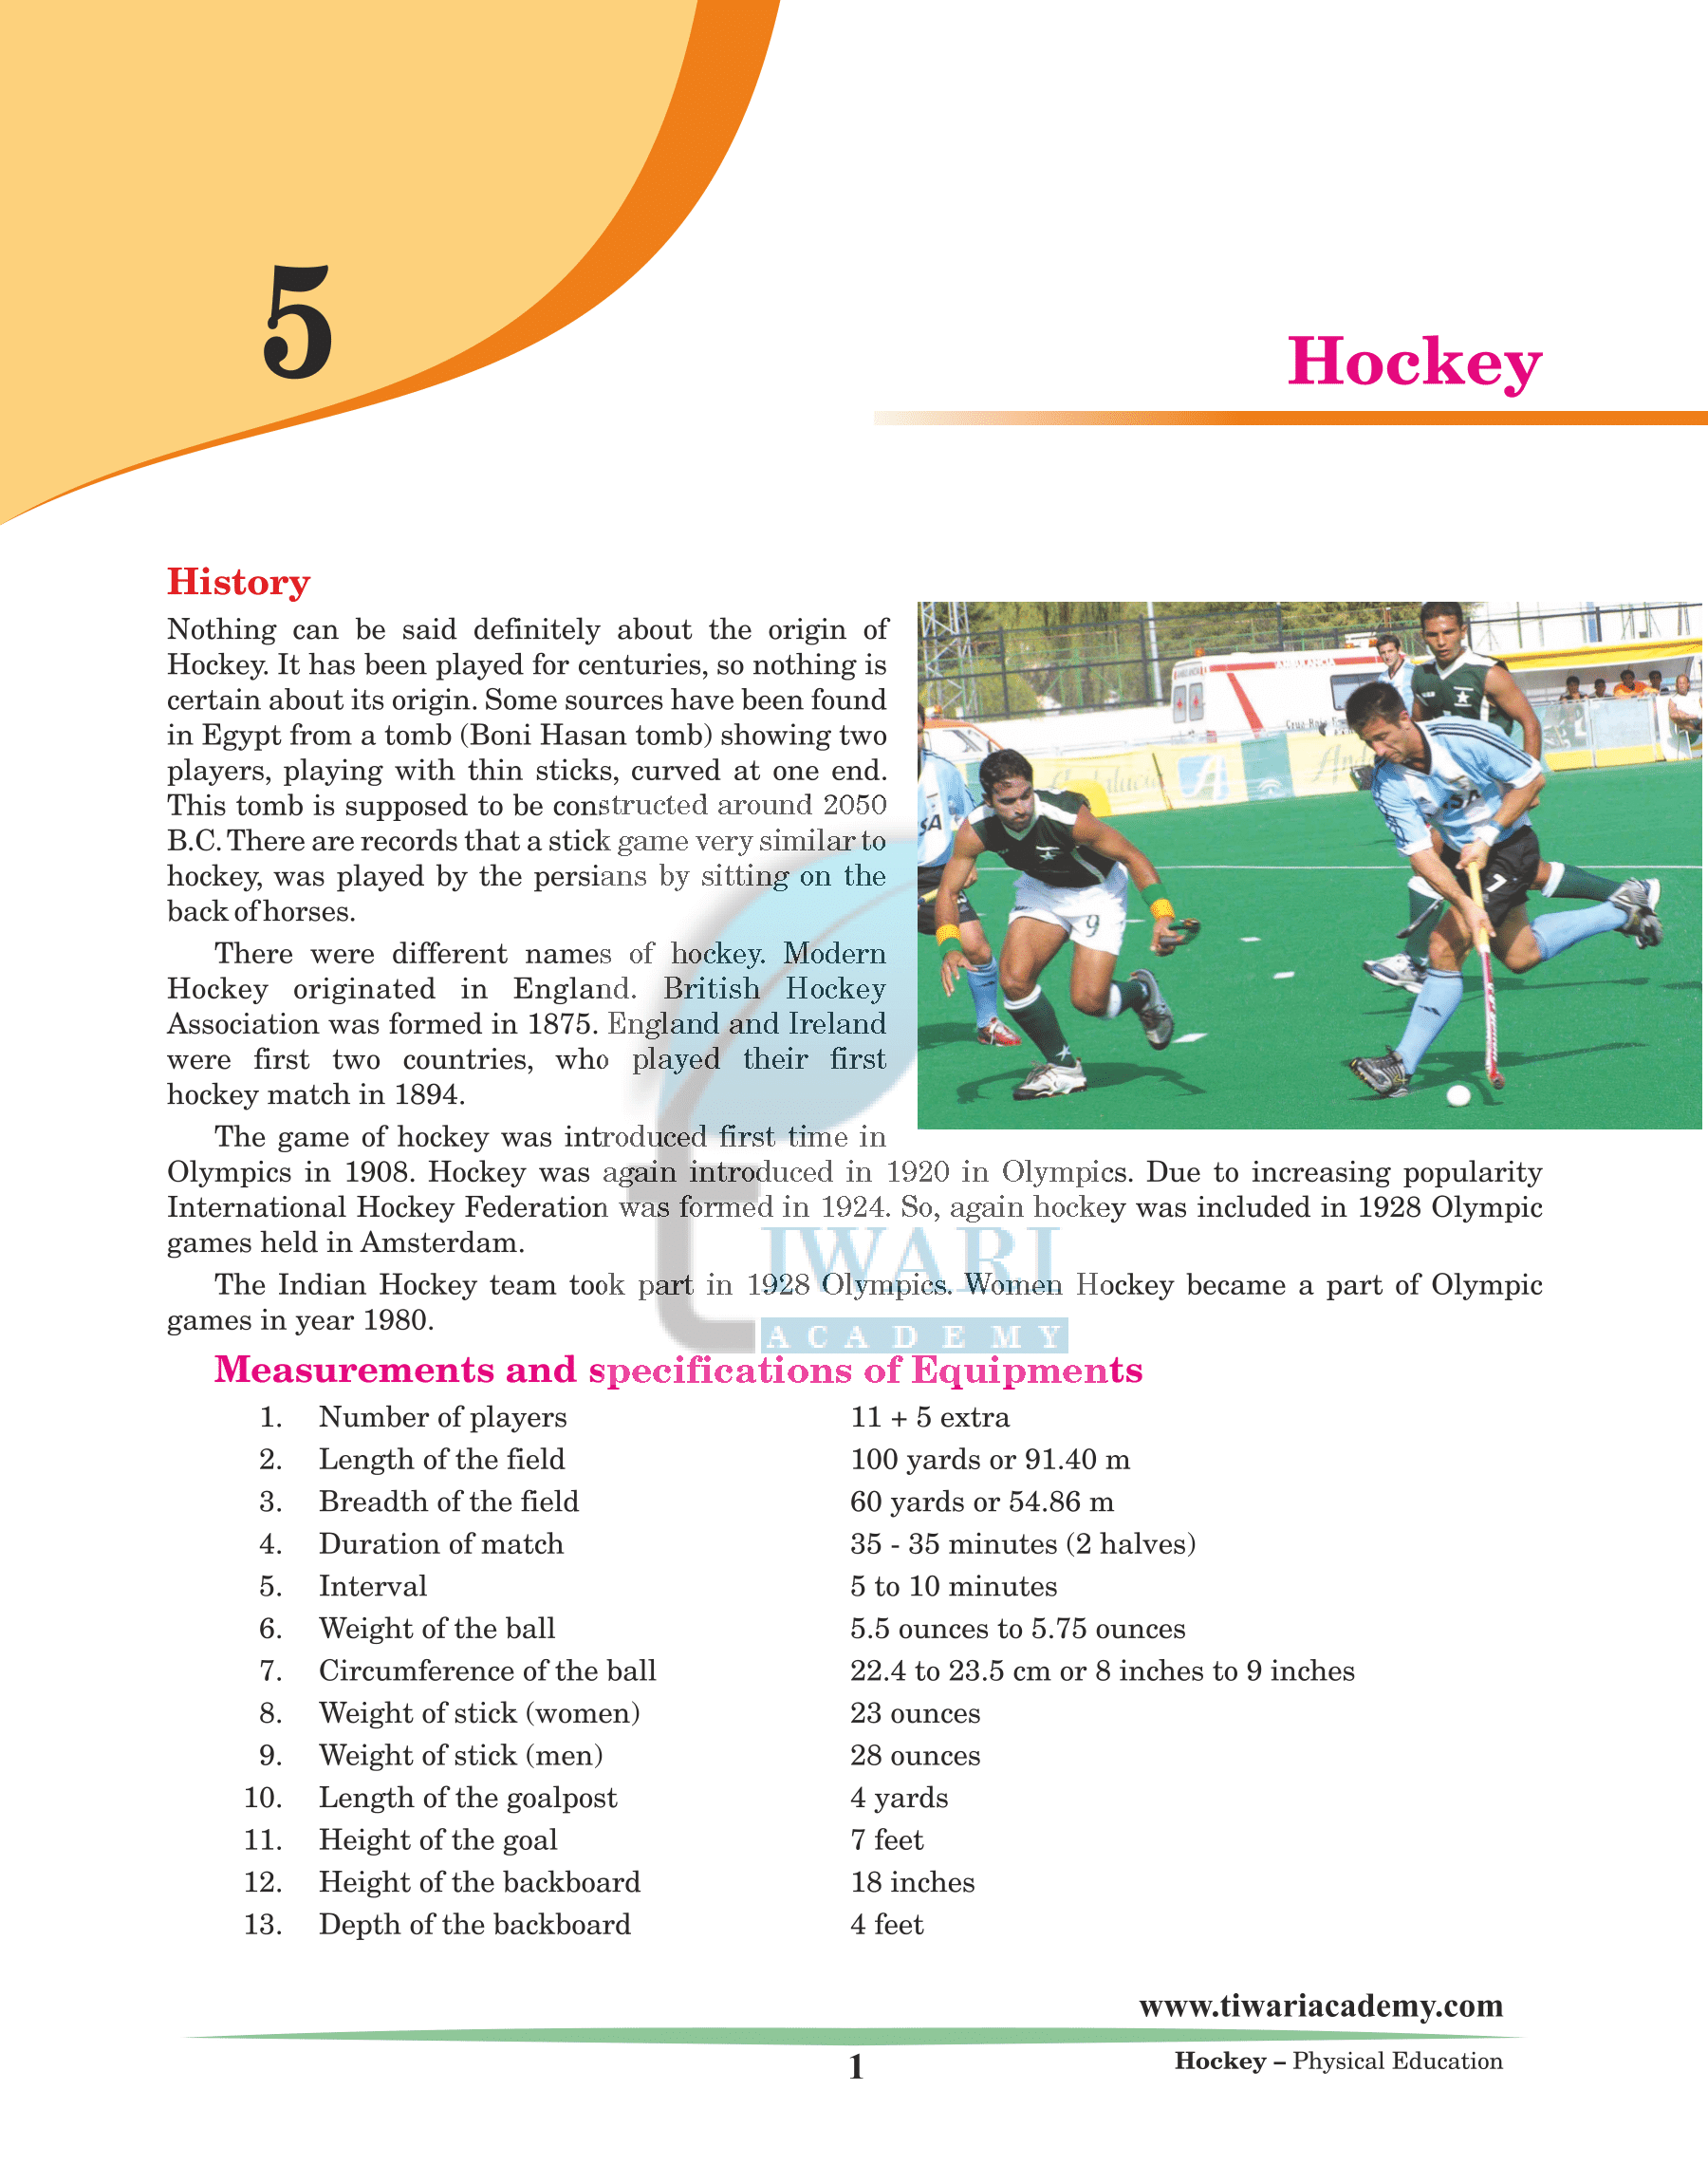 Hockey as an Indian sports